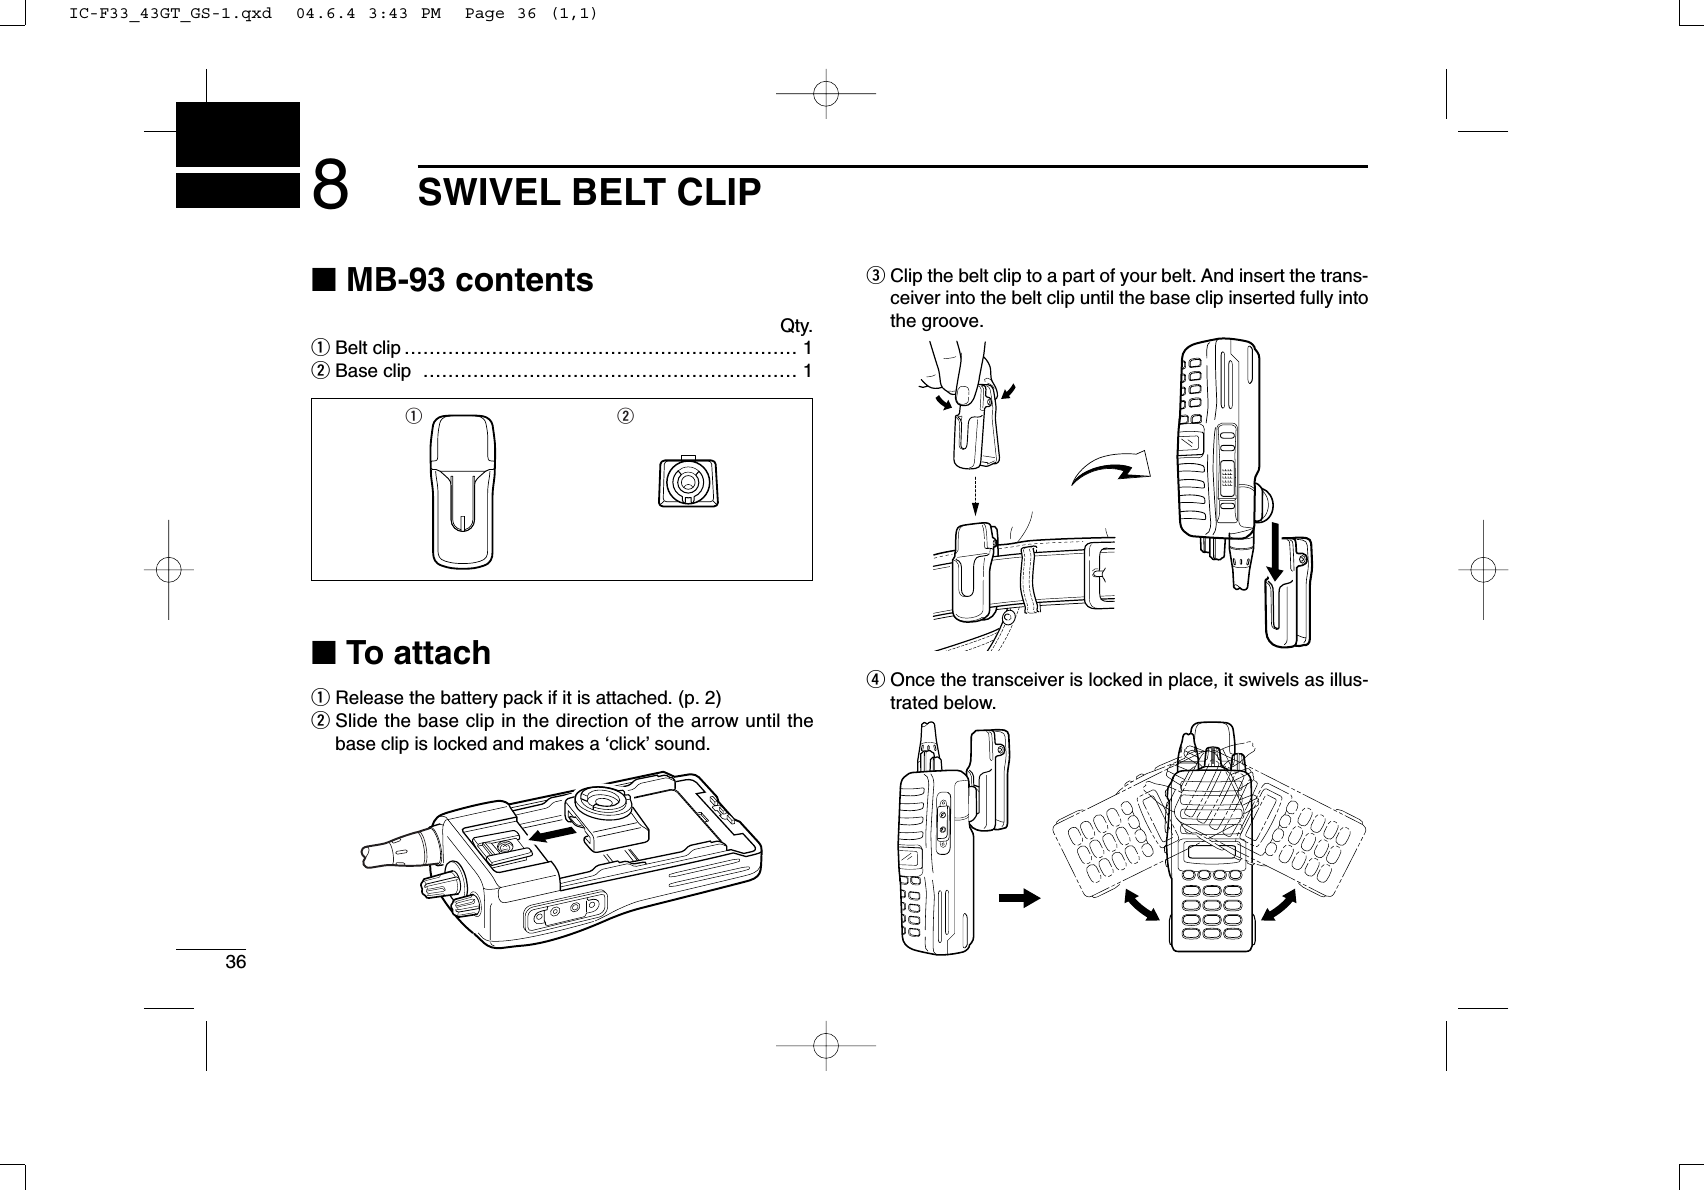 368SWIVEL BELT CLIP■MB-93 contentsQty.qBelt clip ……………………………………………………… 1wBase clip …………………………………………………… 1■To attachqRelease the battery pack if it is attached. (p. 2)wSlide the base clip in the direction of the arrow until thebase clip is locked and makes a ‘click’sound.eClip the belt clip to a part of your belt. And insert the trans-ceiver into the belt clip until the base clip inserted fully intothe groove.rOnce the transceiver is locked in place, it swivels as illus-trated below.q wIC-F33_43GT_GS-1.qxd  04.6.4 3:43 PM  Page 36 (1,1)